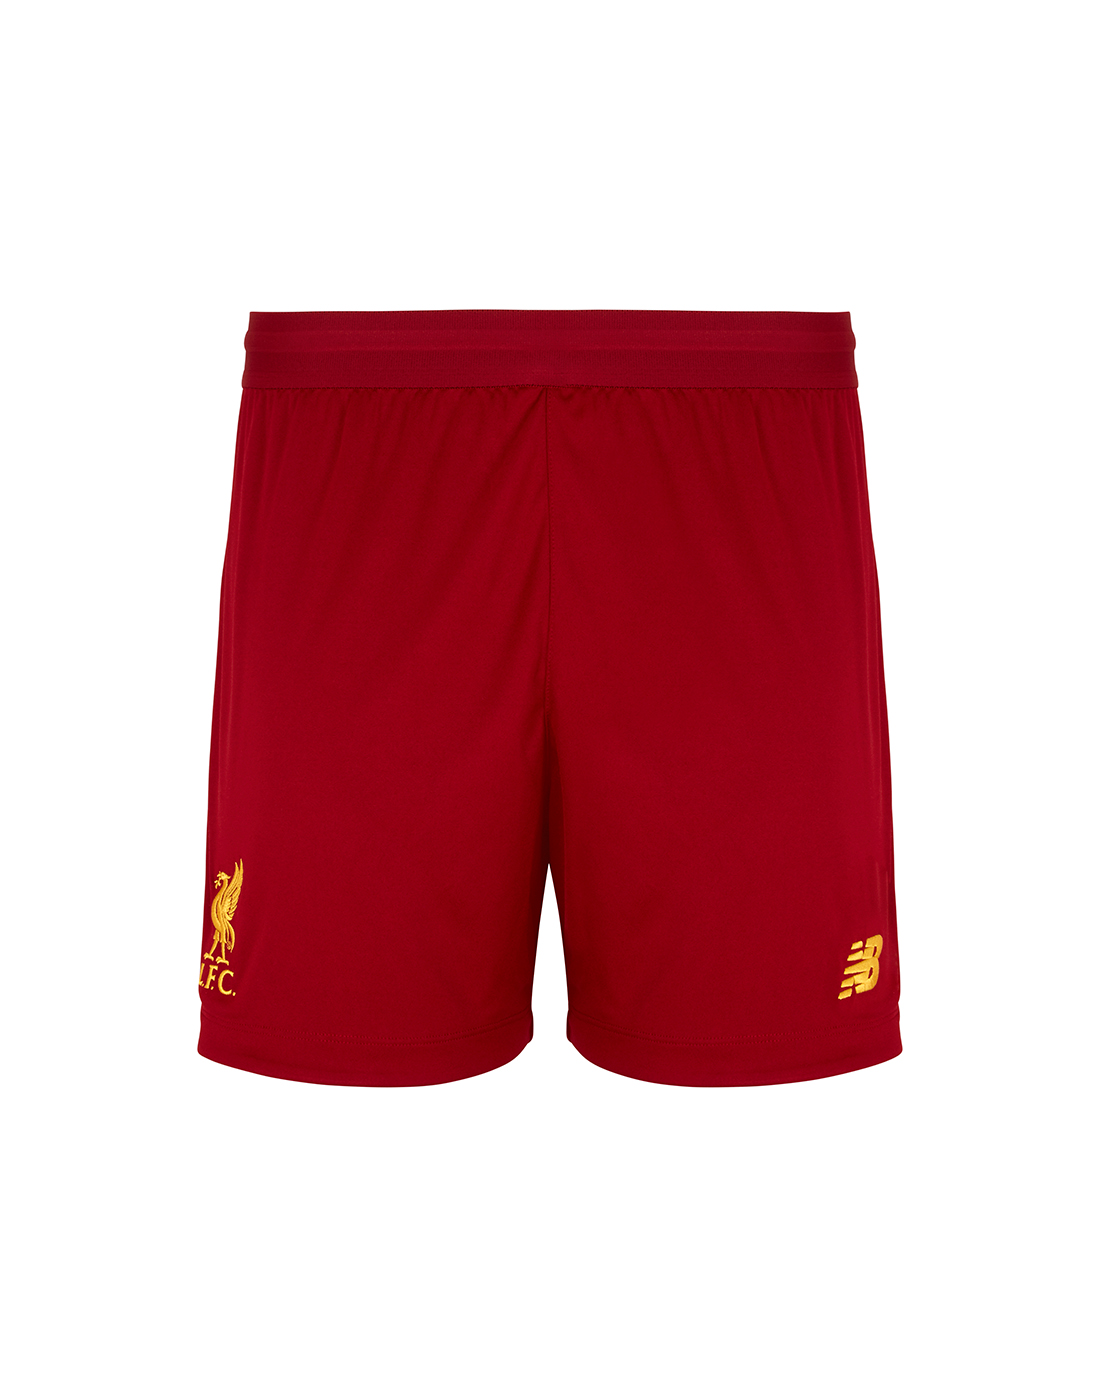 Liverpool 19/20 Home Shorts Life Style